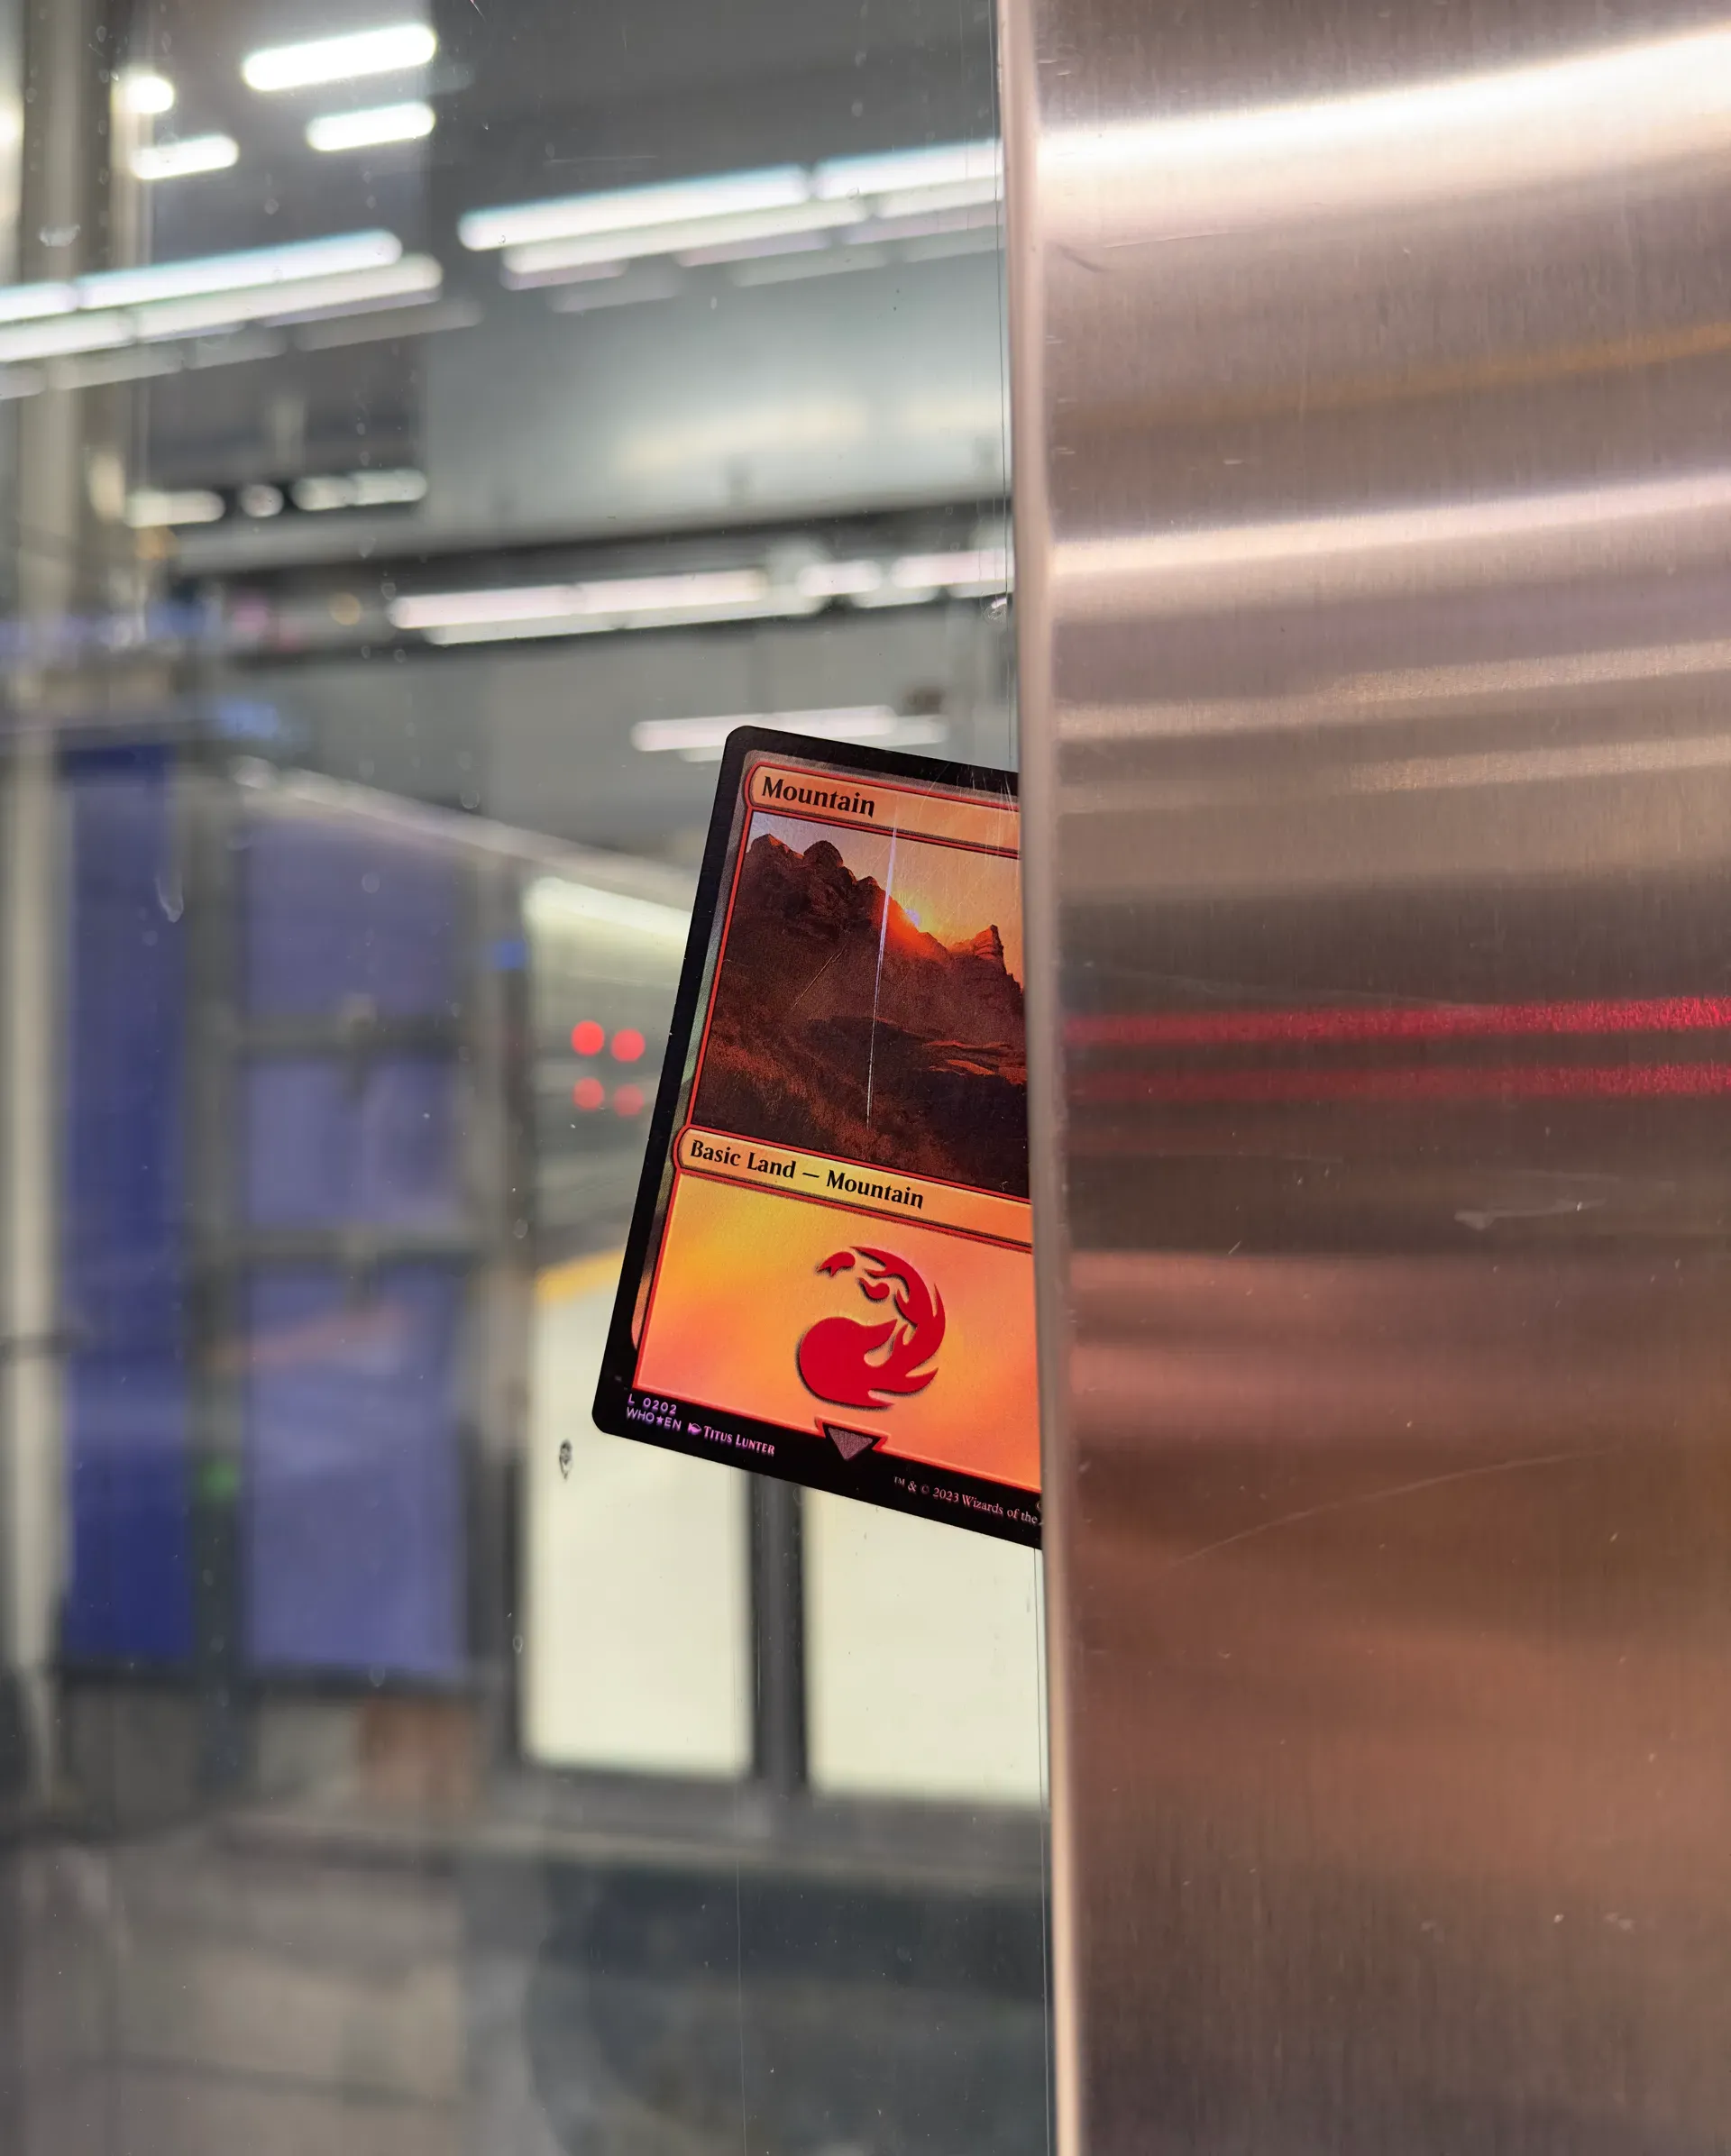 A Magic: The Gathering card stuck in a Muni station